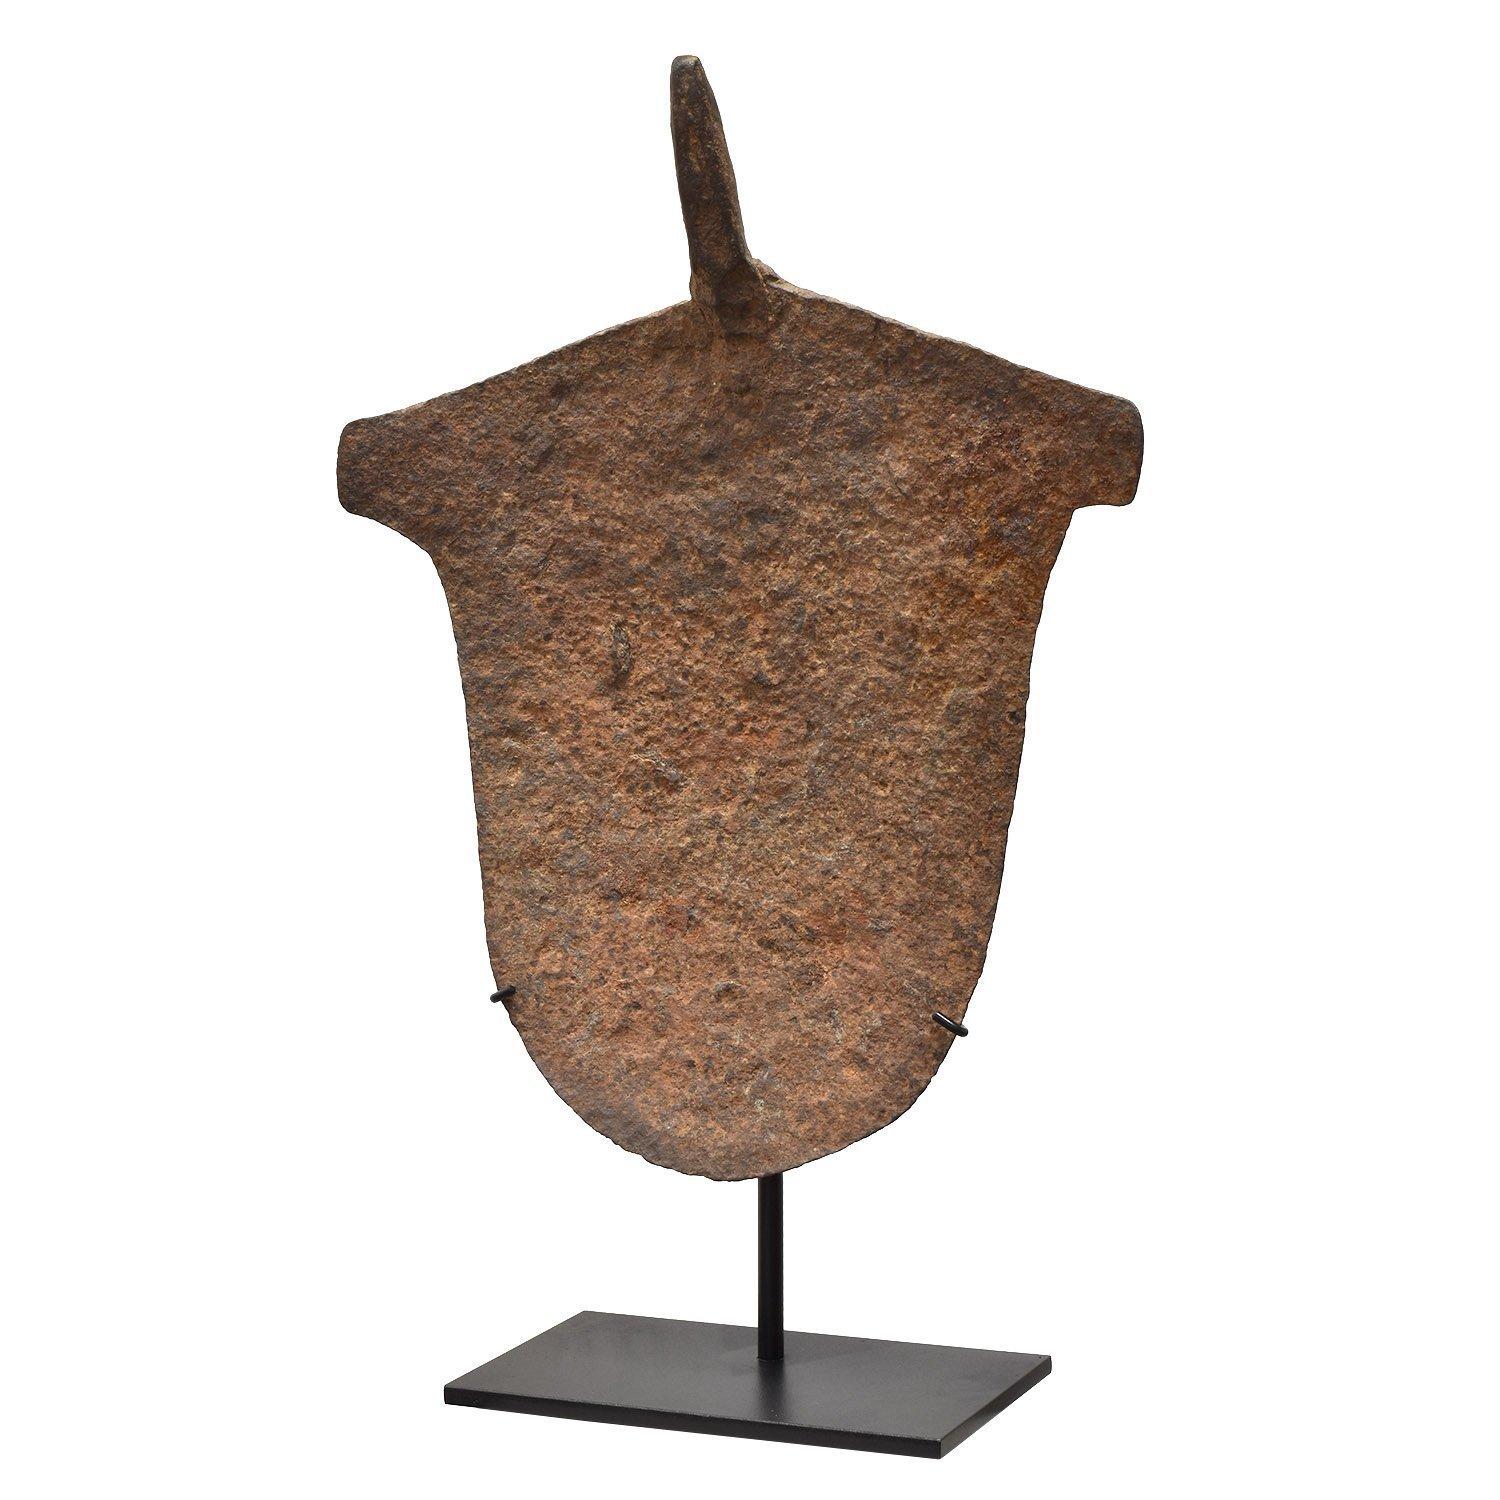 Extra Large Curved Hoe Currency

Angas, Nigeria
Early 20th century
Iron
20.5 x 16 in. / 52 x 41 cm
Height on custom display stand: 25 in. / 64 cm
Weight: 7.2 pounds / 3.3 kg
Combined weight with base: 14.3 pounds / 6.5 kg

The large currency forms